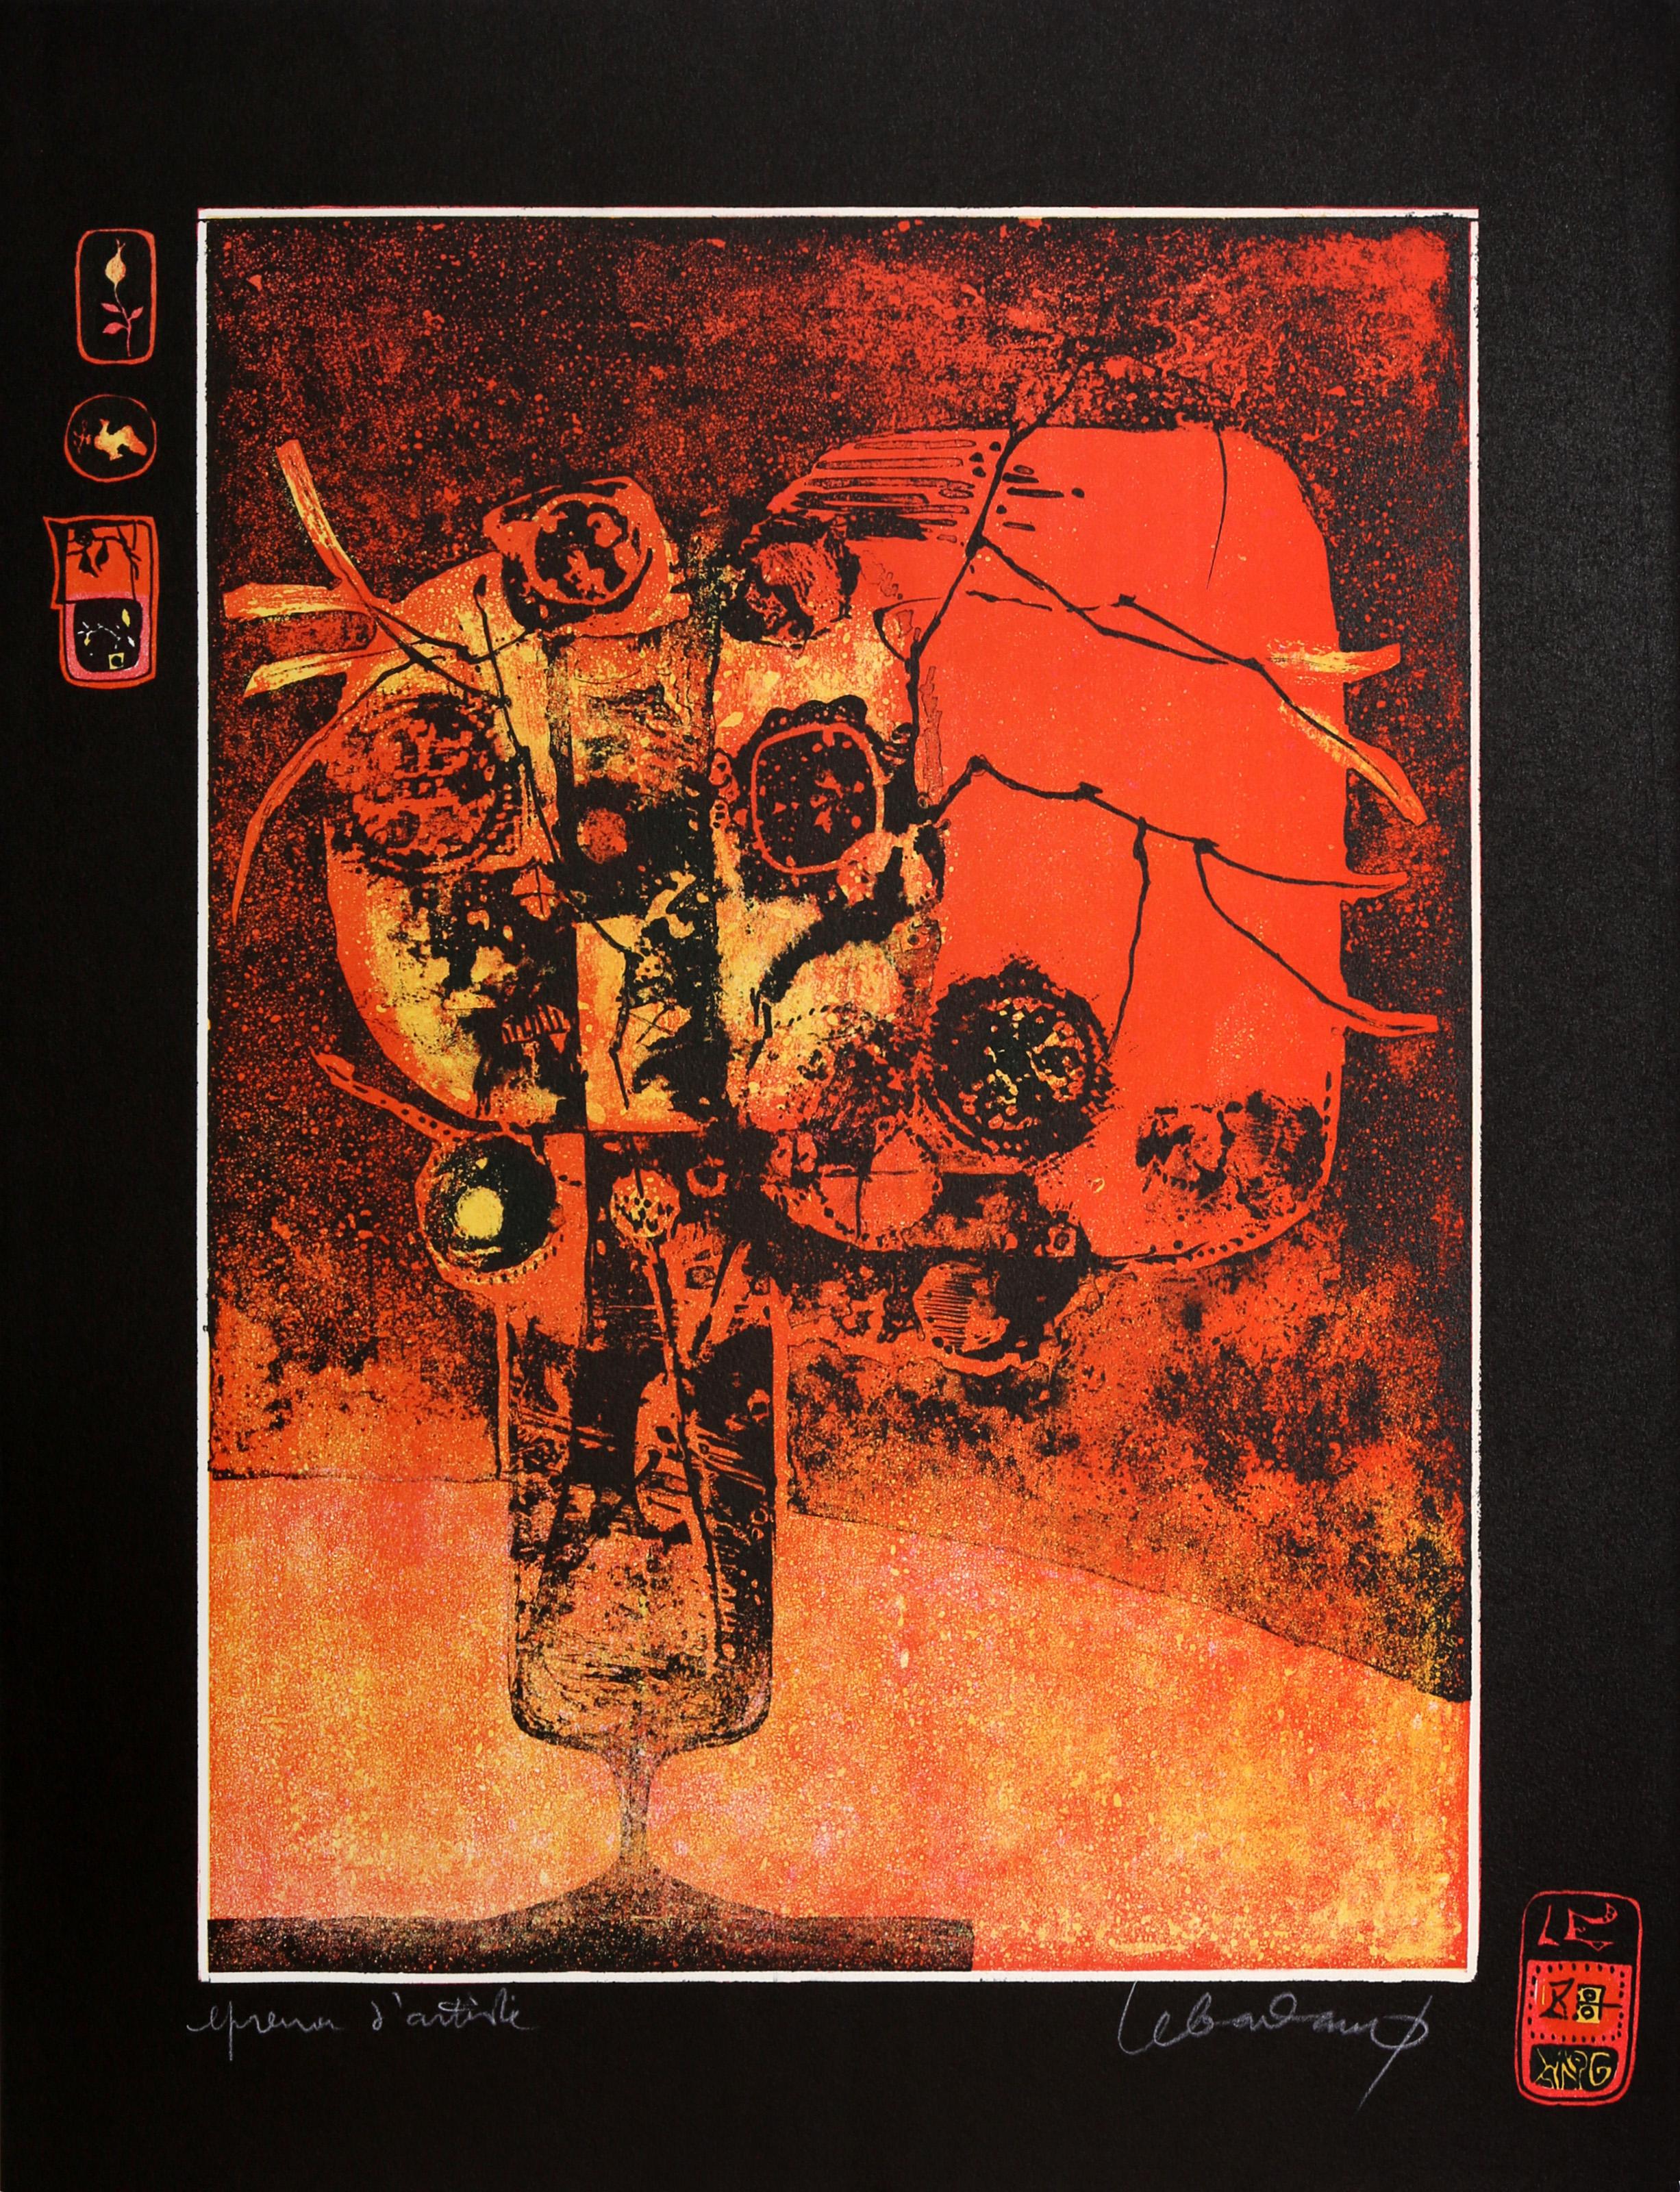 Lebadang (aka Hoi), Vietnamese (1922 - 2015) -  Still Life in Red and Black. Medium: Lithograph, signed and numbered in pencil, Edition: E.A., Image Size: 21 x 15 inches, Size: 26 x 20 in. (66.04 x 50.8 cm), Description: Lebadang was a Vietnam-born